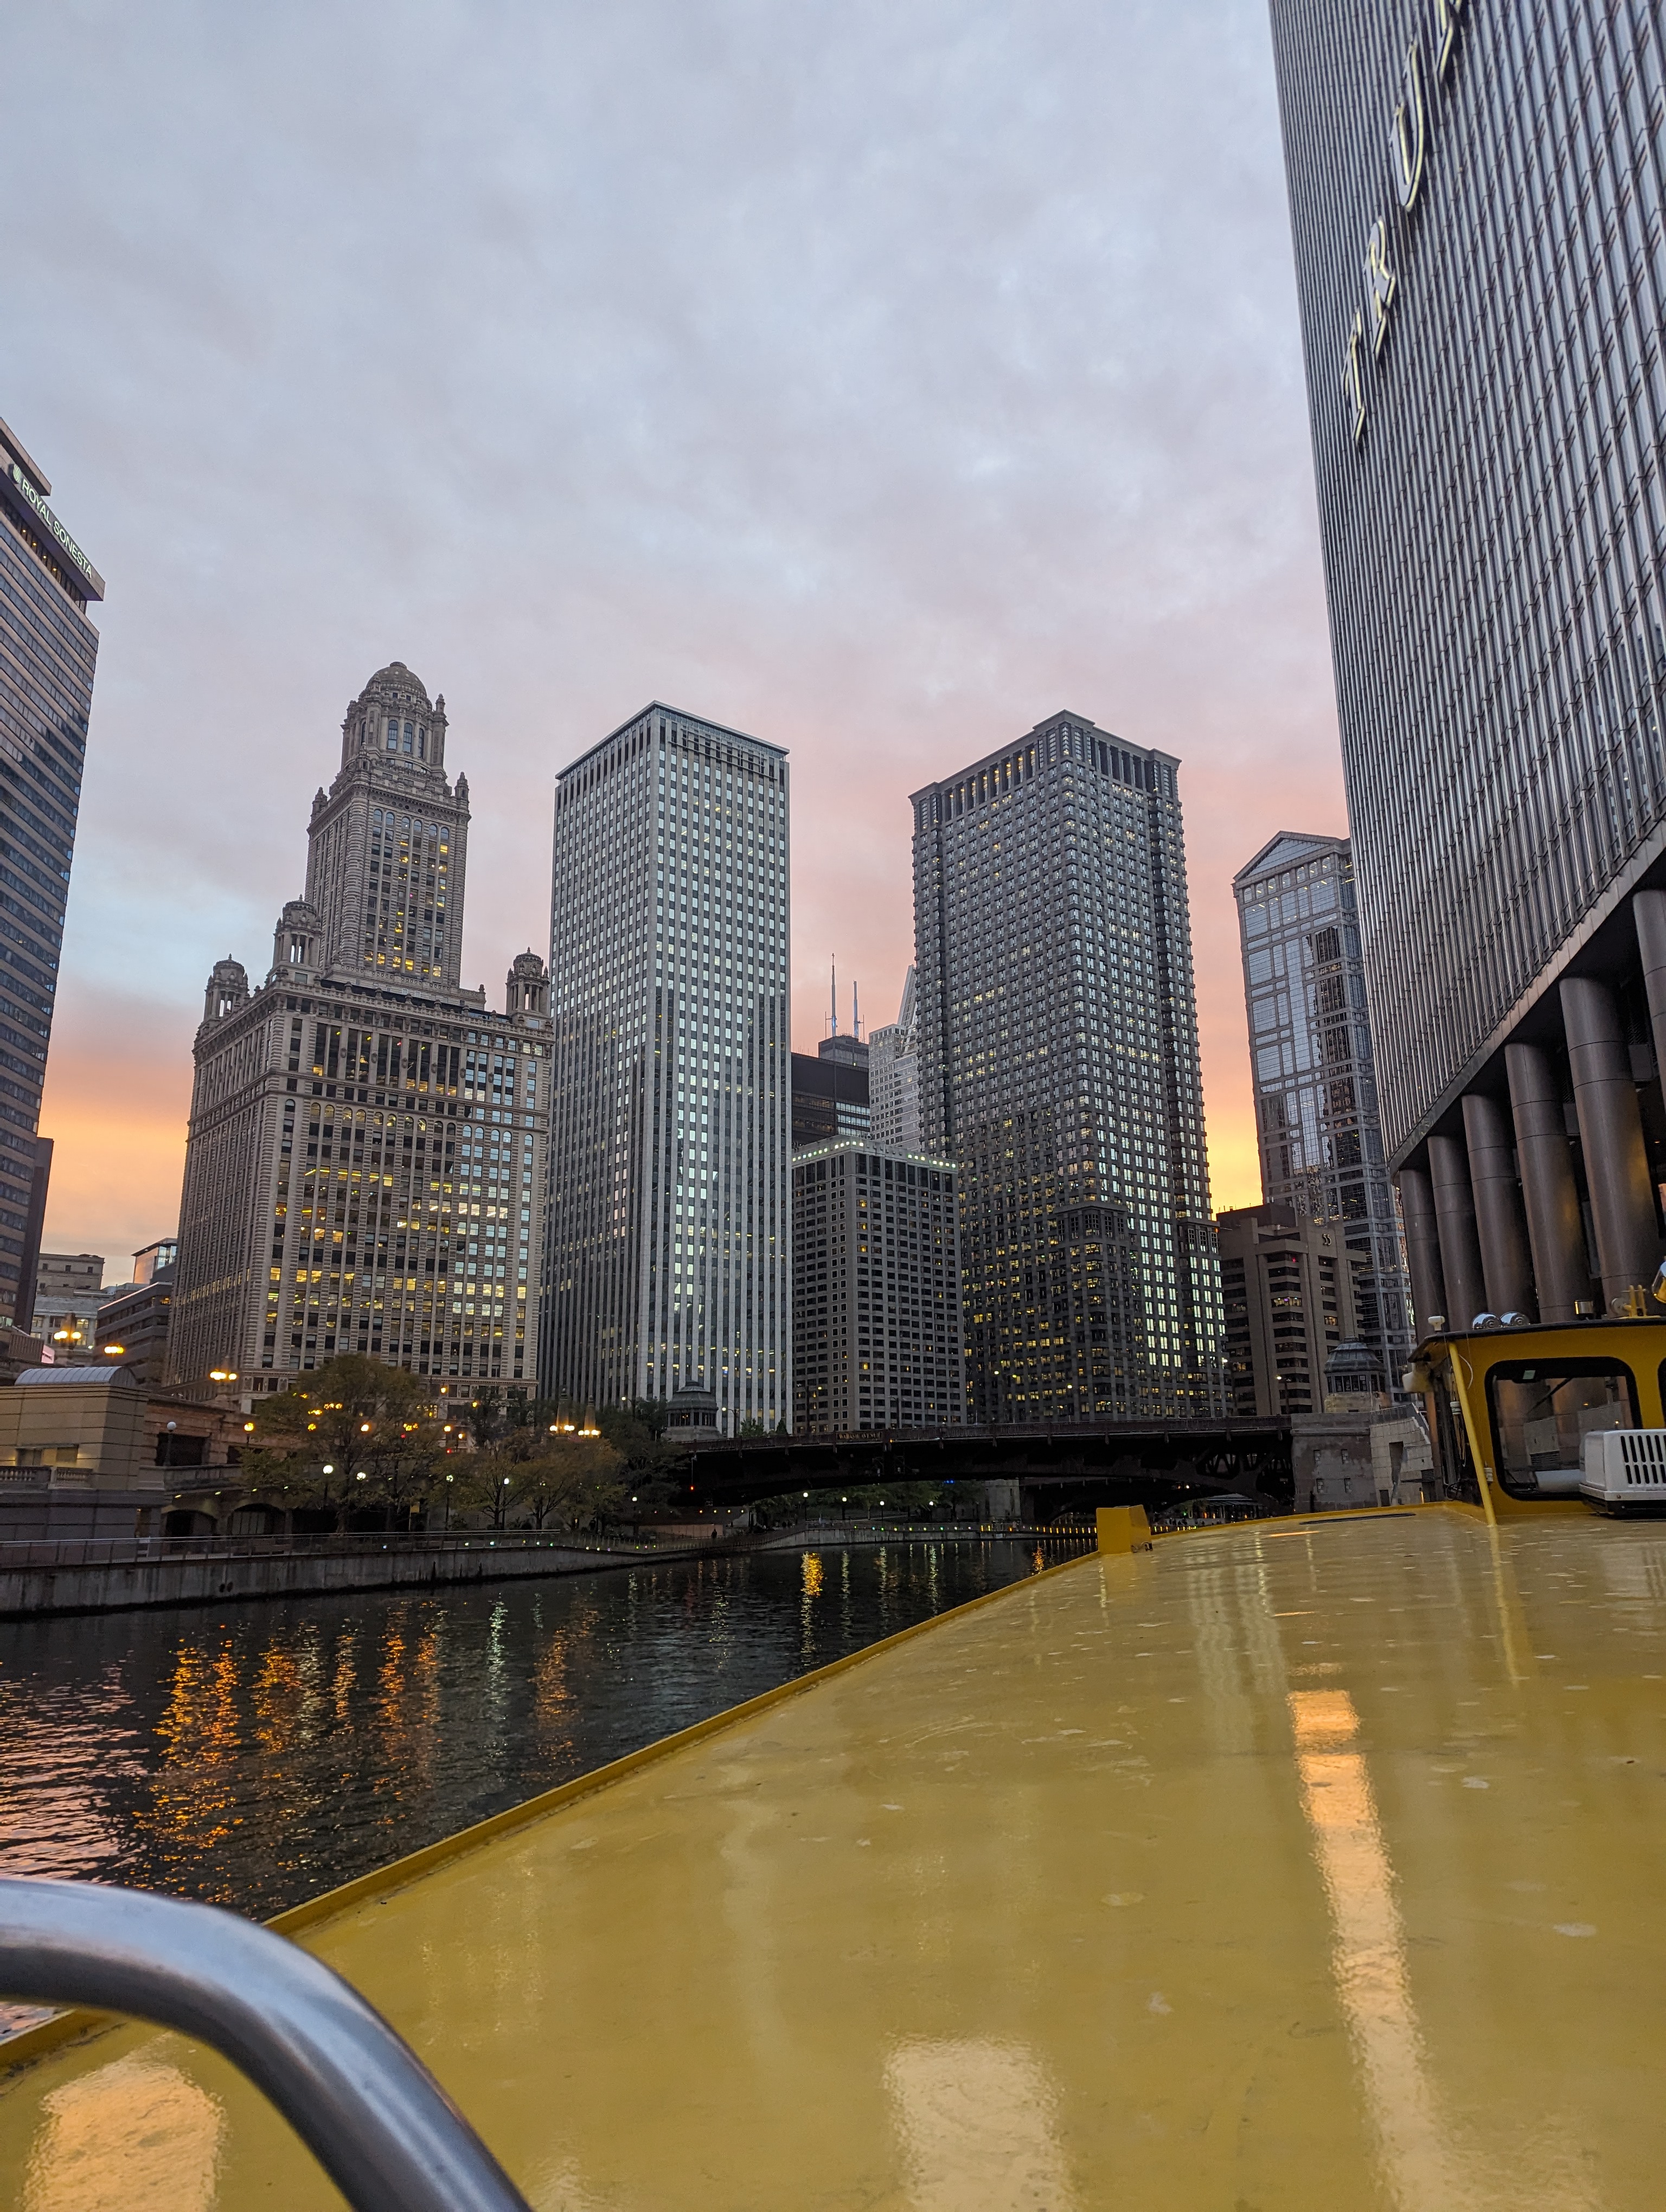 A yellow boat on the Chicago river surrounded by skyscrapers (specifically trump tower to the right and the jewler's building to the left) as the sun sets in the distance.